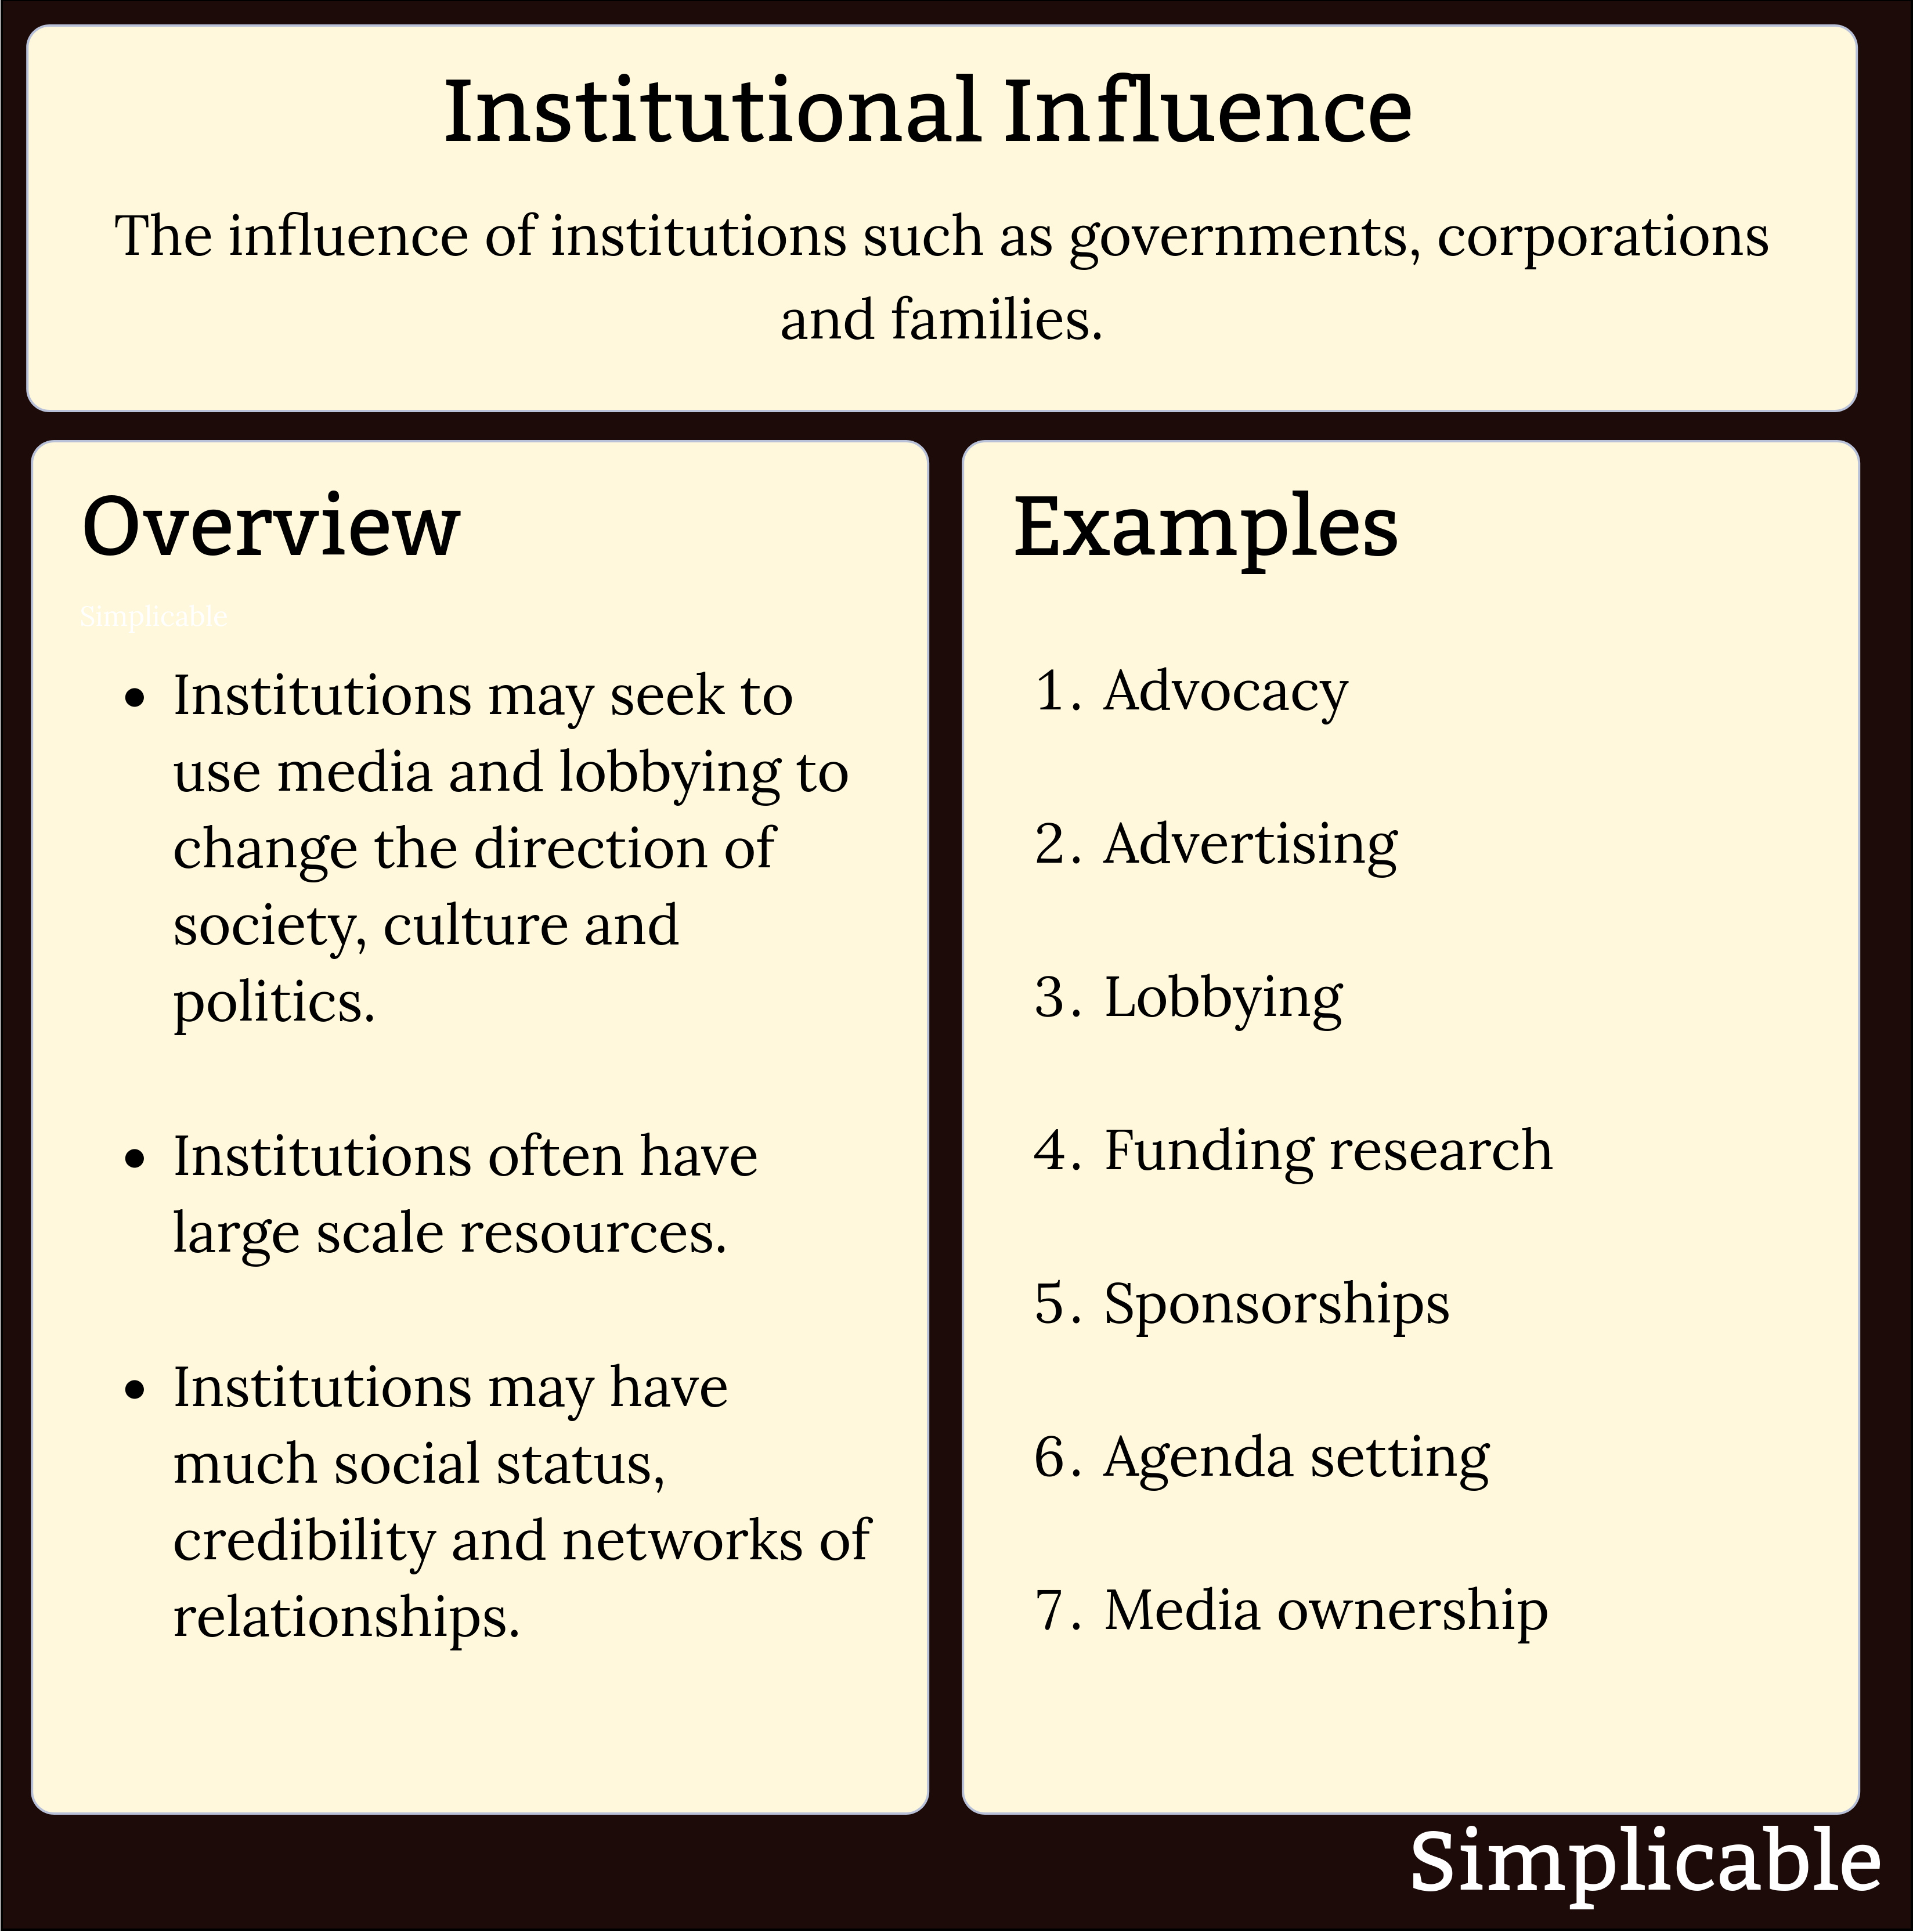 institutional influence definition and examples